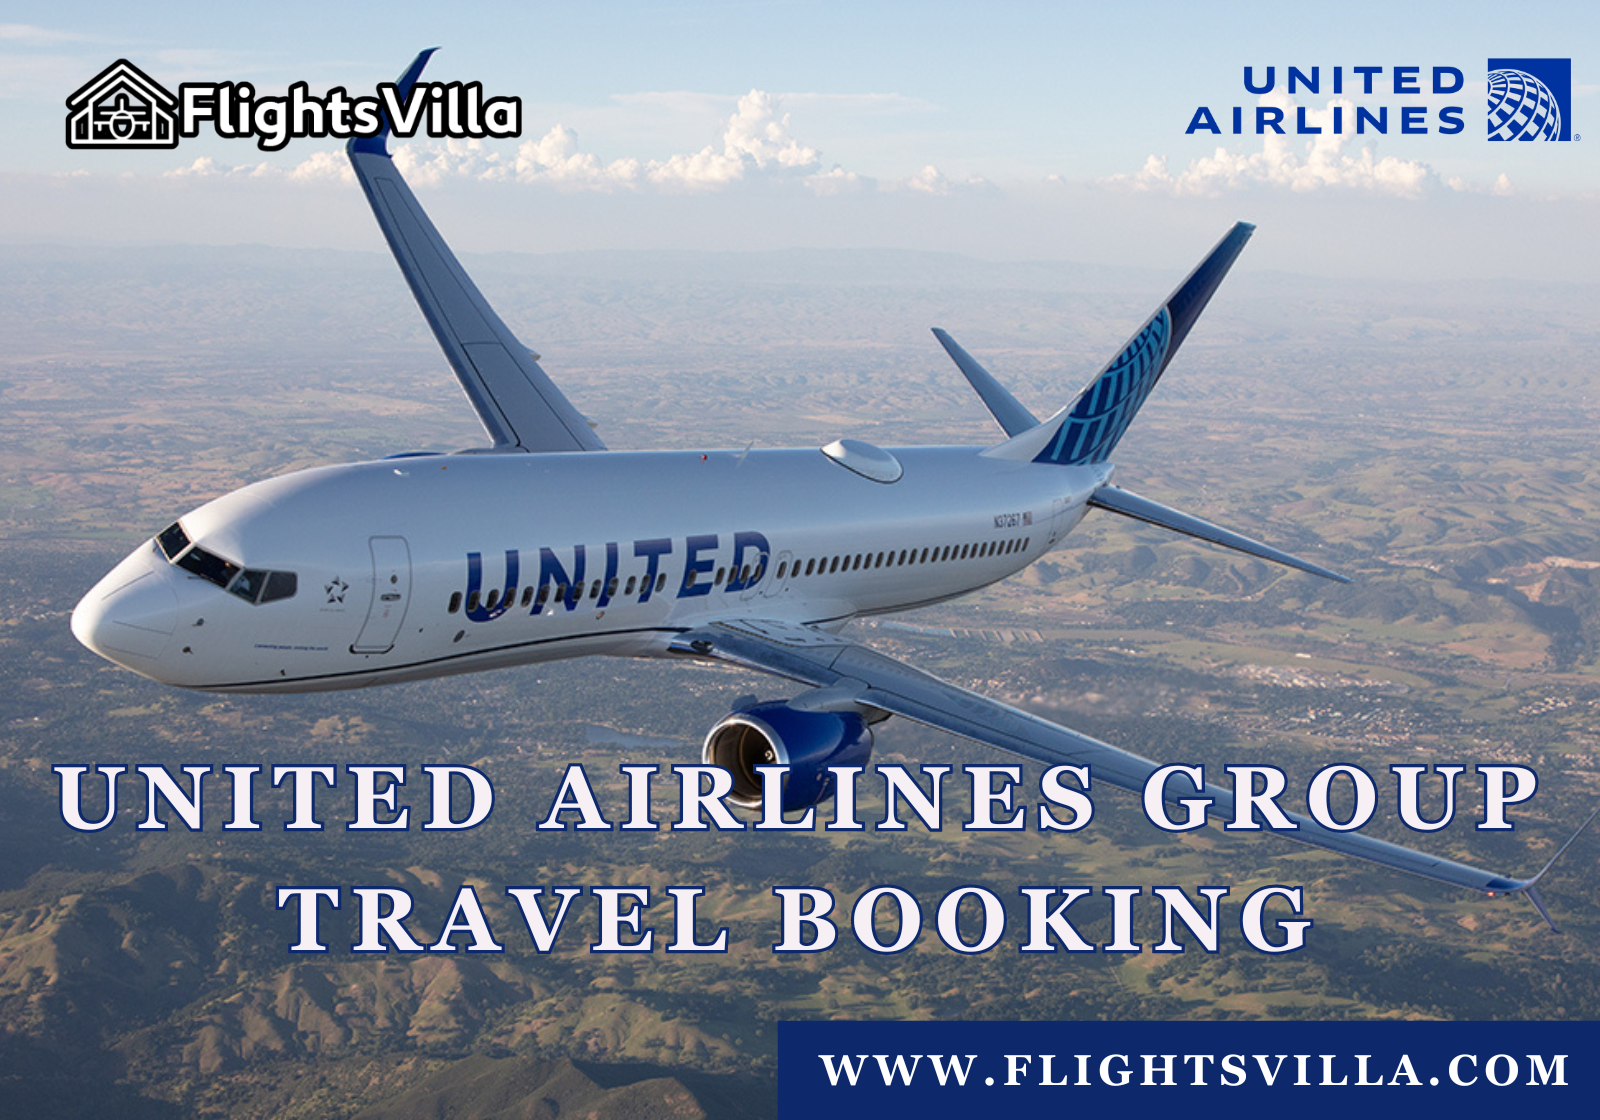 JetBlue Airlines Group Travel Booking